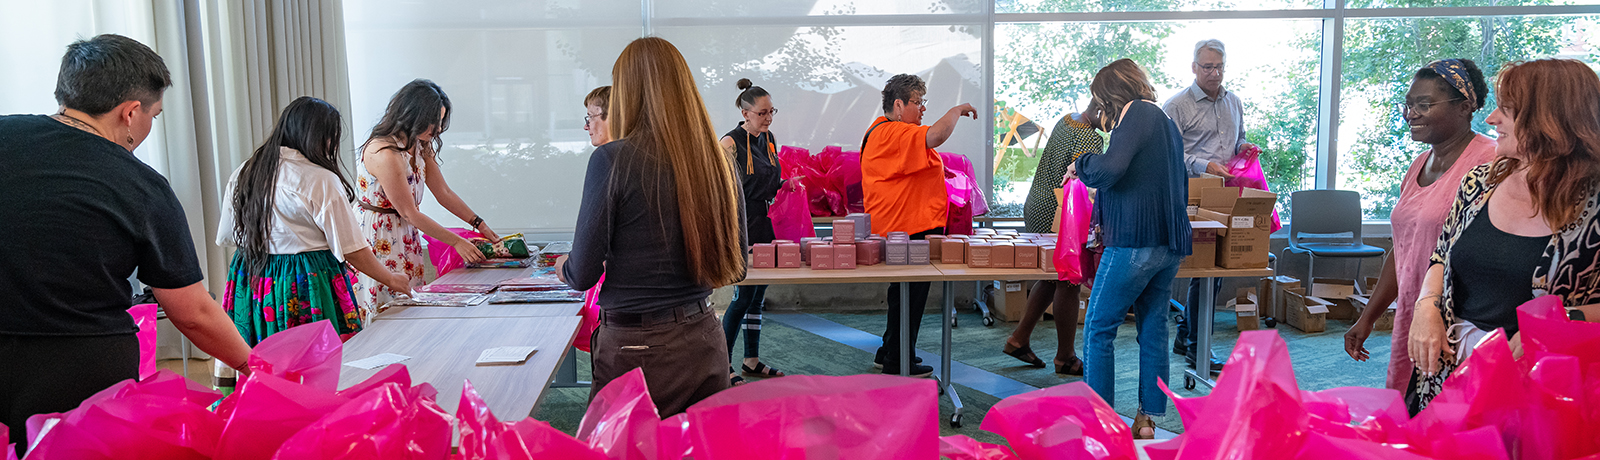 A group of volunteers gather around a large table, placing objects in pink plastic bags.